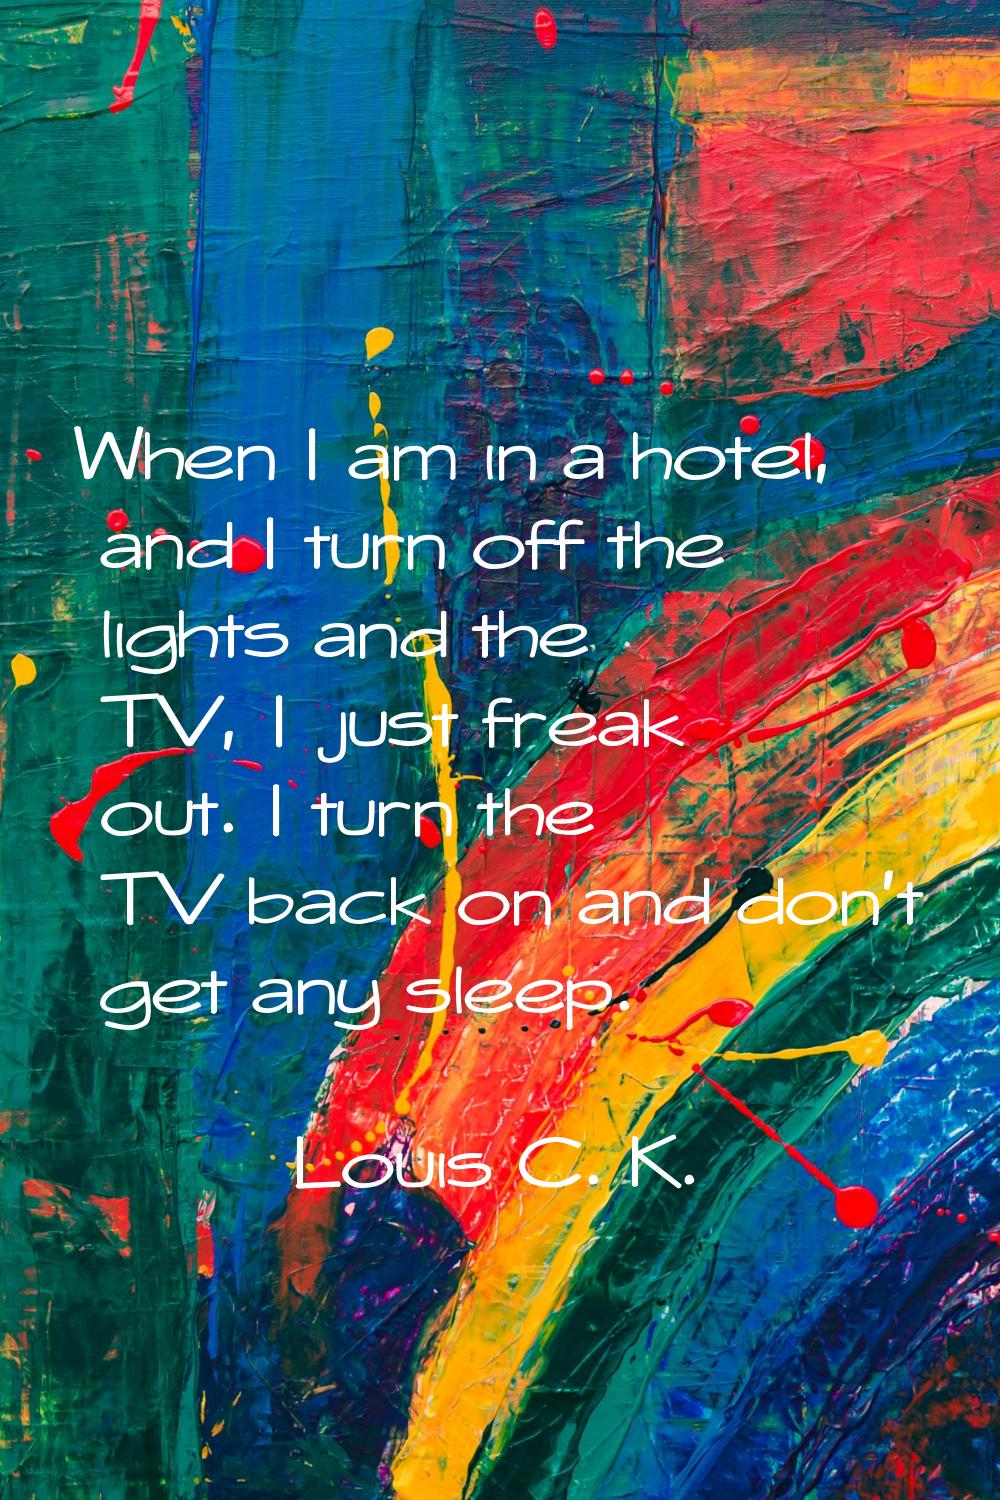 When I am in a hotel, and I turn off the lights and the TV, I just freak out. I turn the TV back on